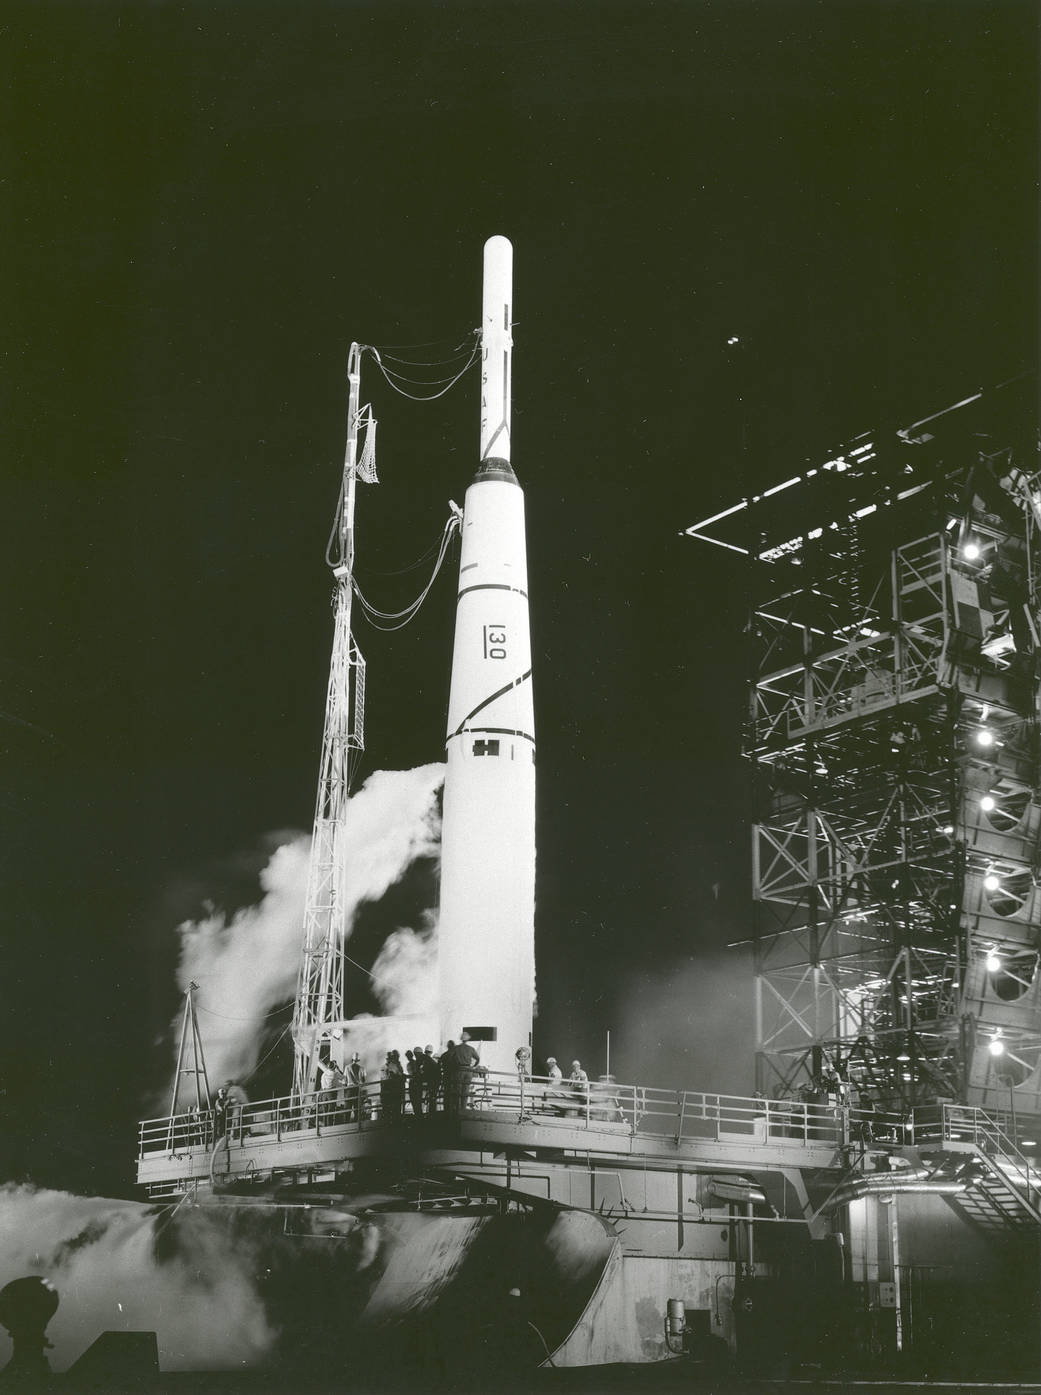 Rocket at launchpad with Pioneer spacecraft on board